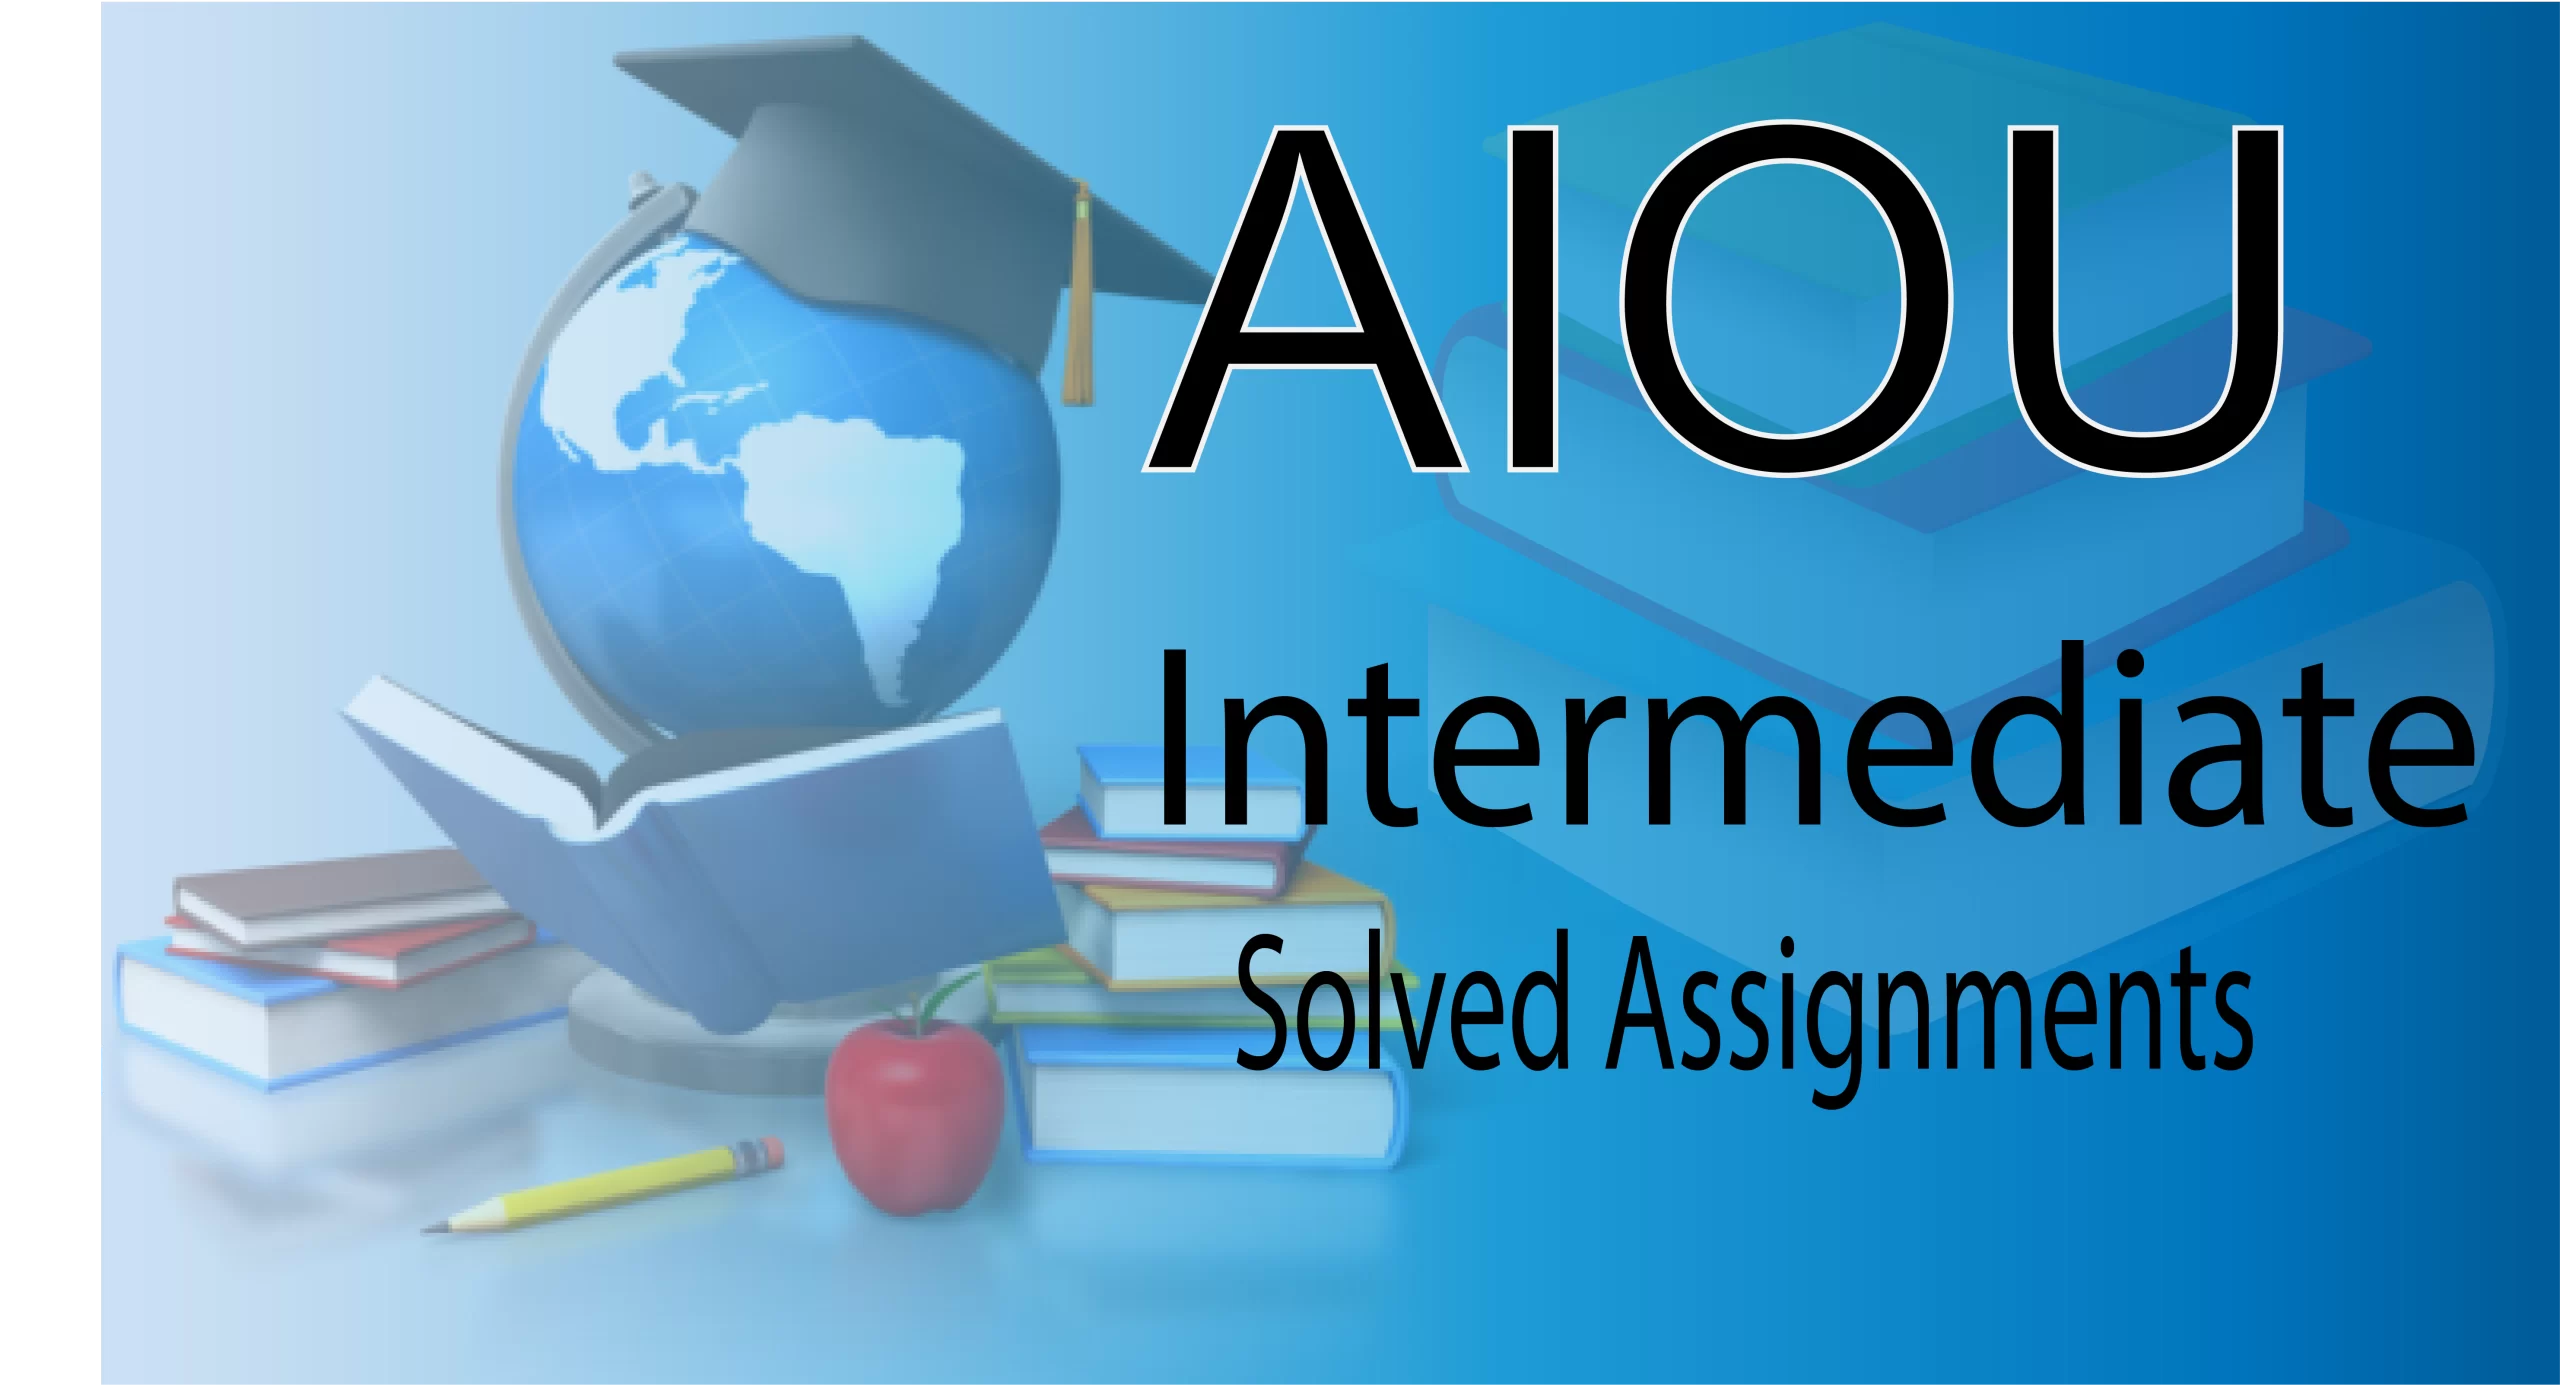 aiou solved assignments fa